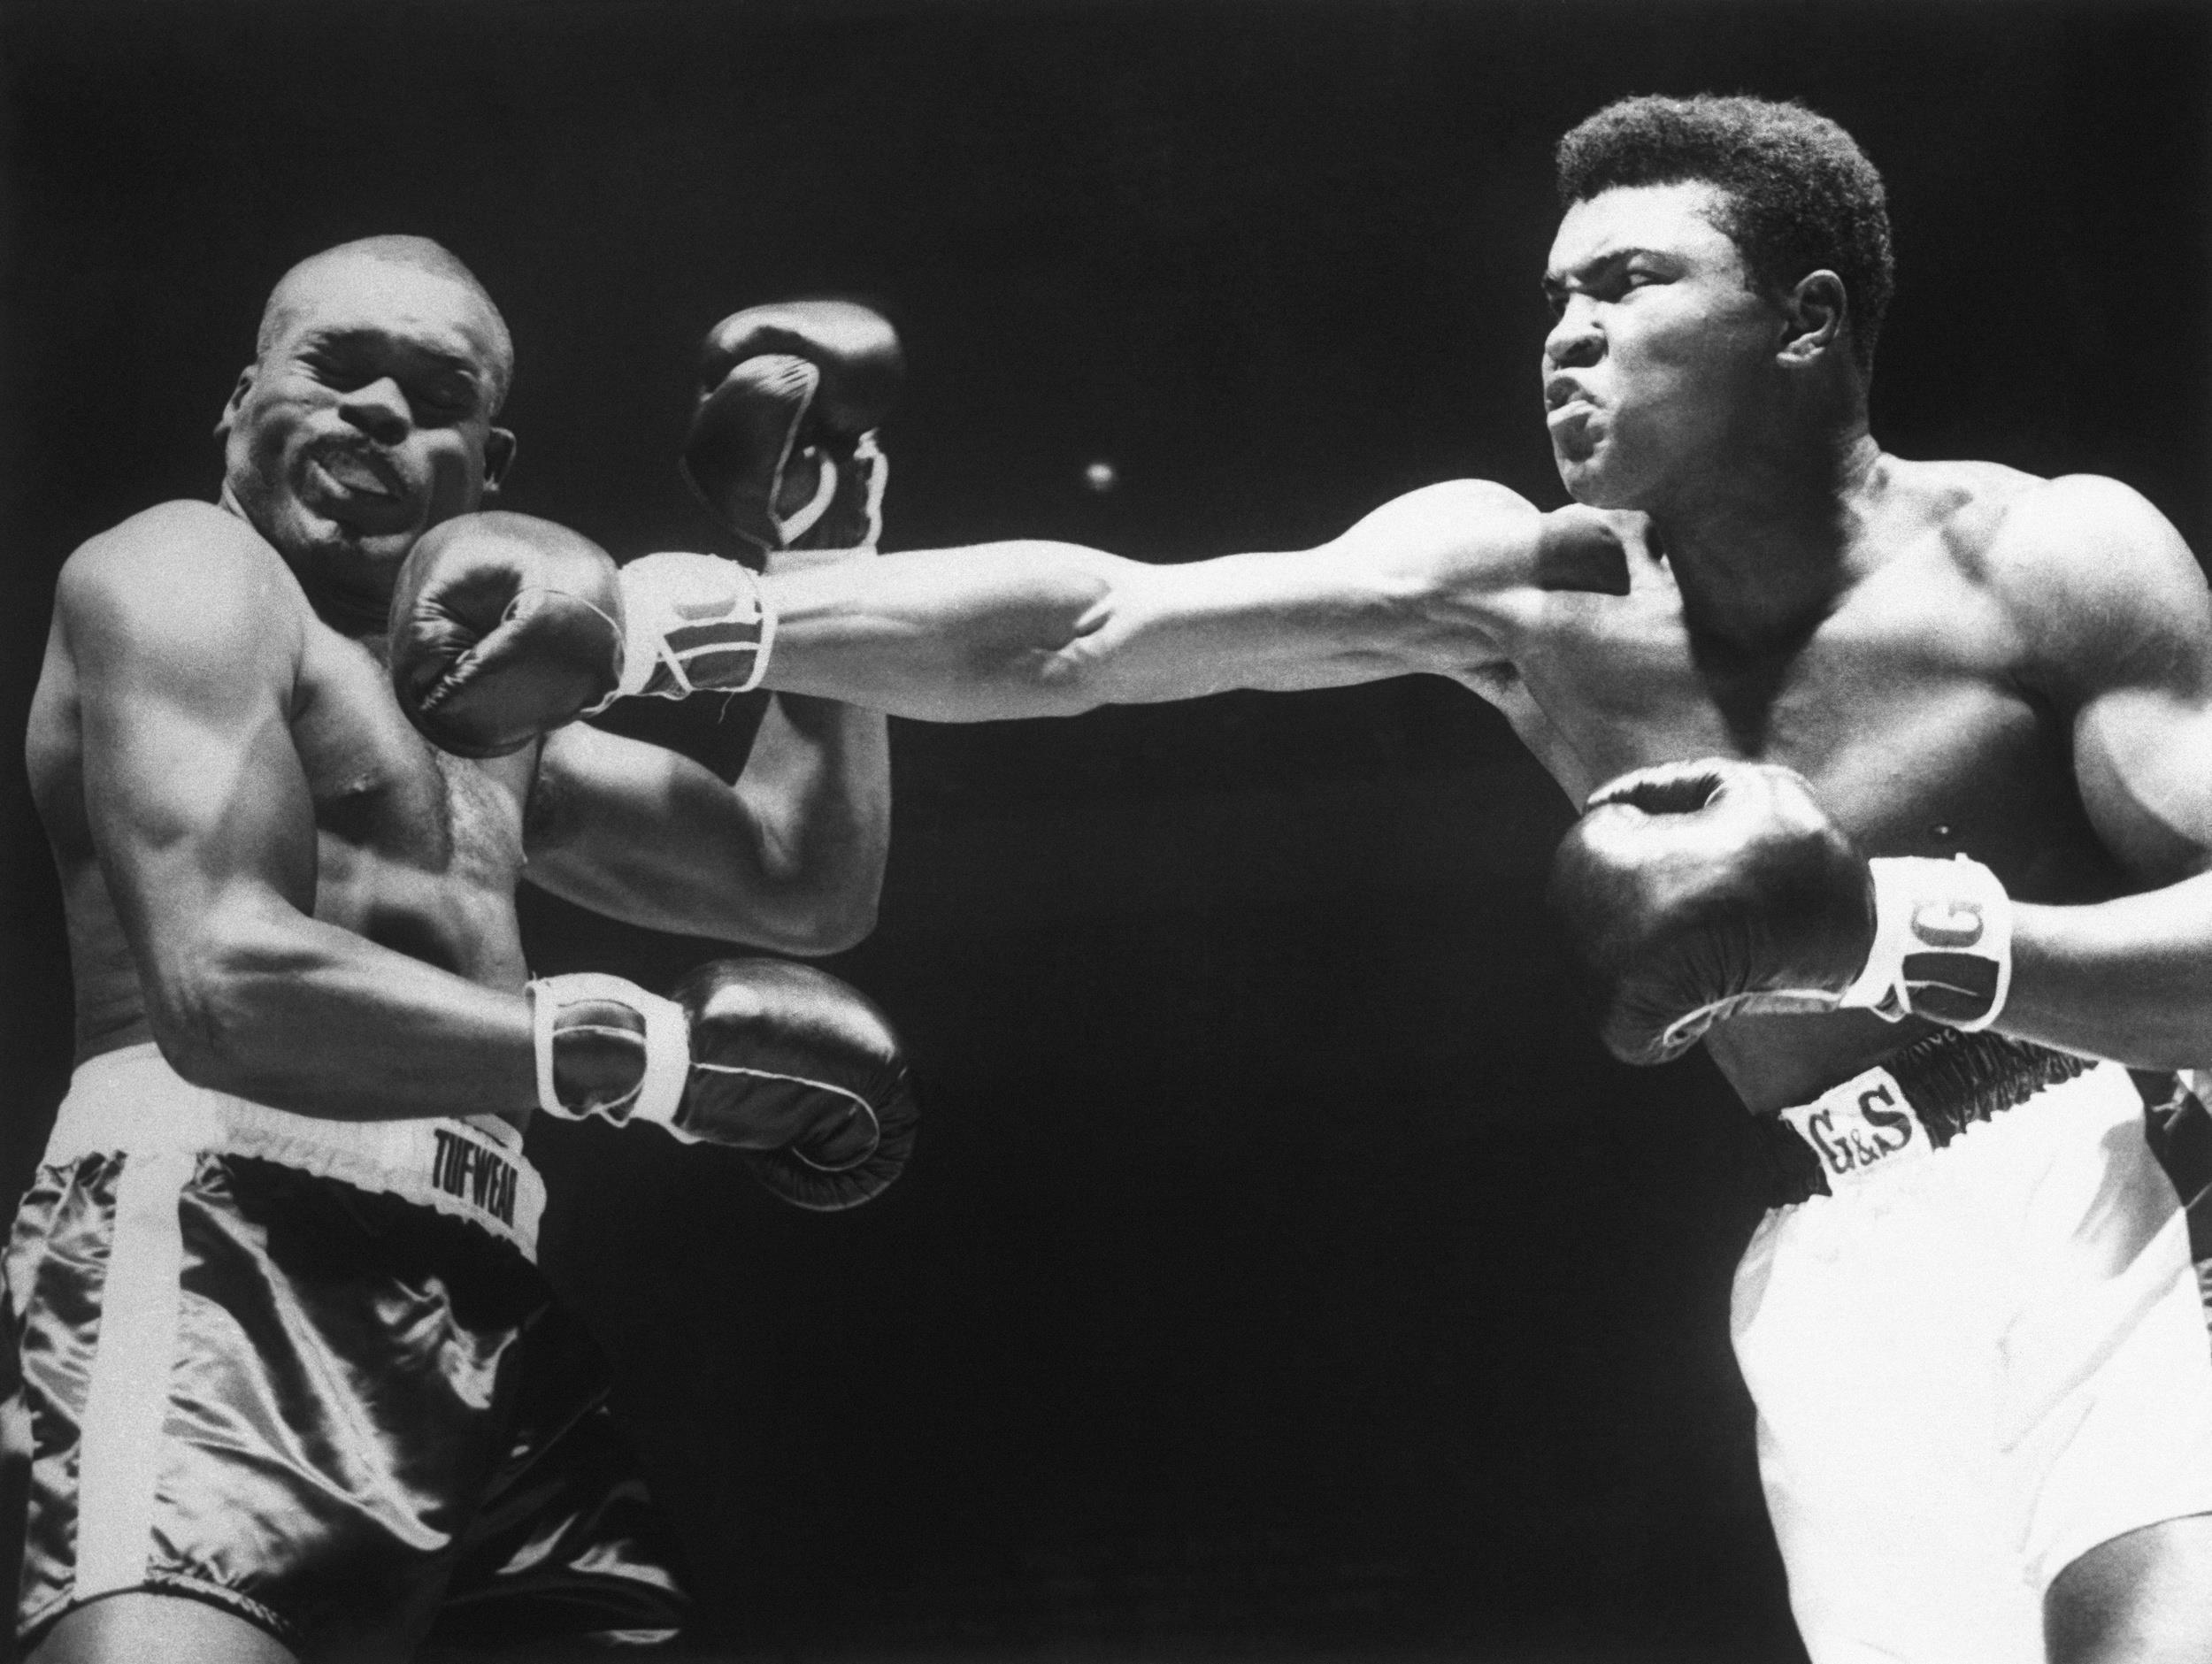 Ring masters: The best pound-for-pound boxers of all time